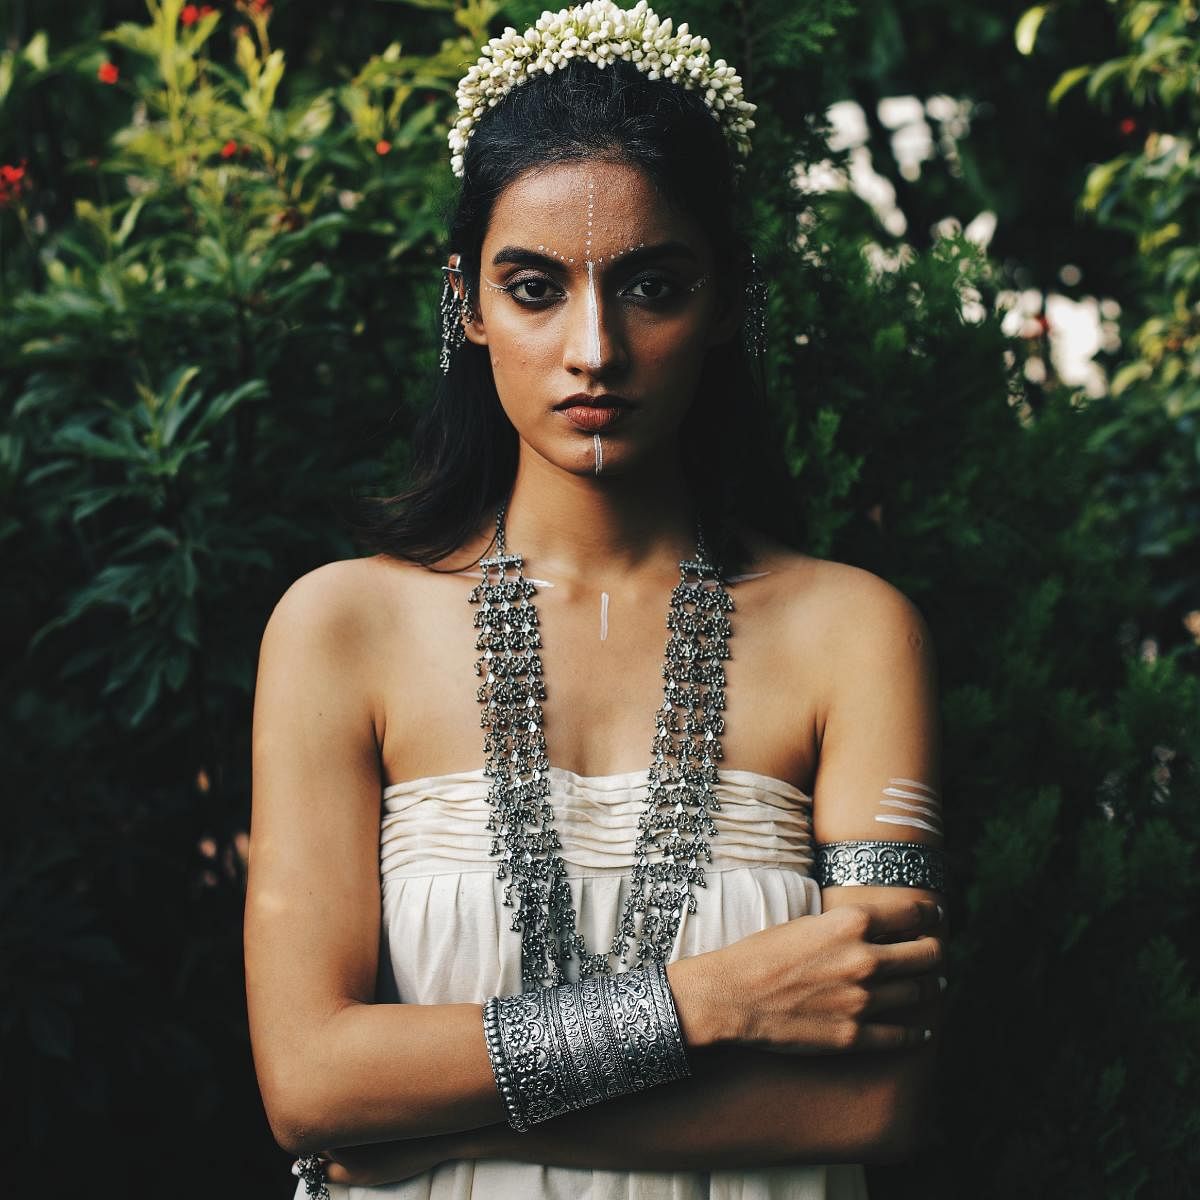 ‘Moon string’, a sustainable jewellery collection by Ahmedabad-based Creyons. It was made by artisans in Jaipur, Delhi and Kolkata. Credit: Special arrangement